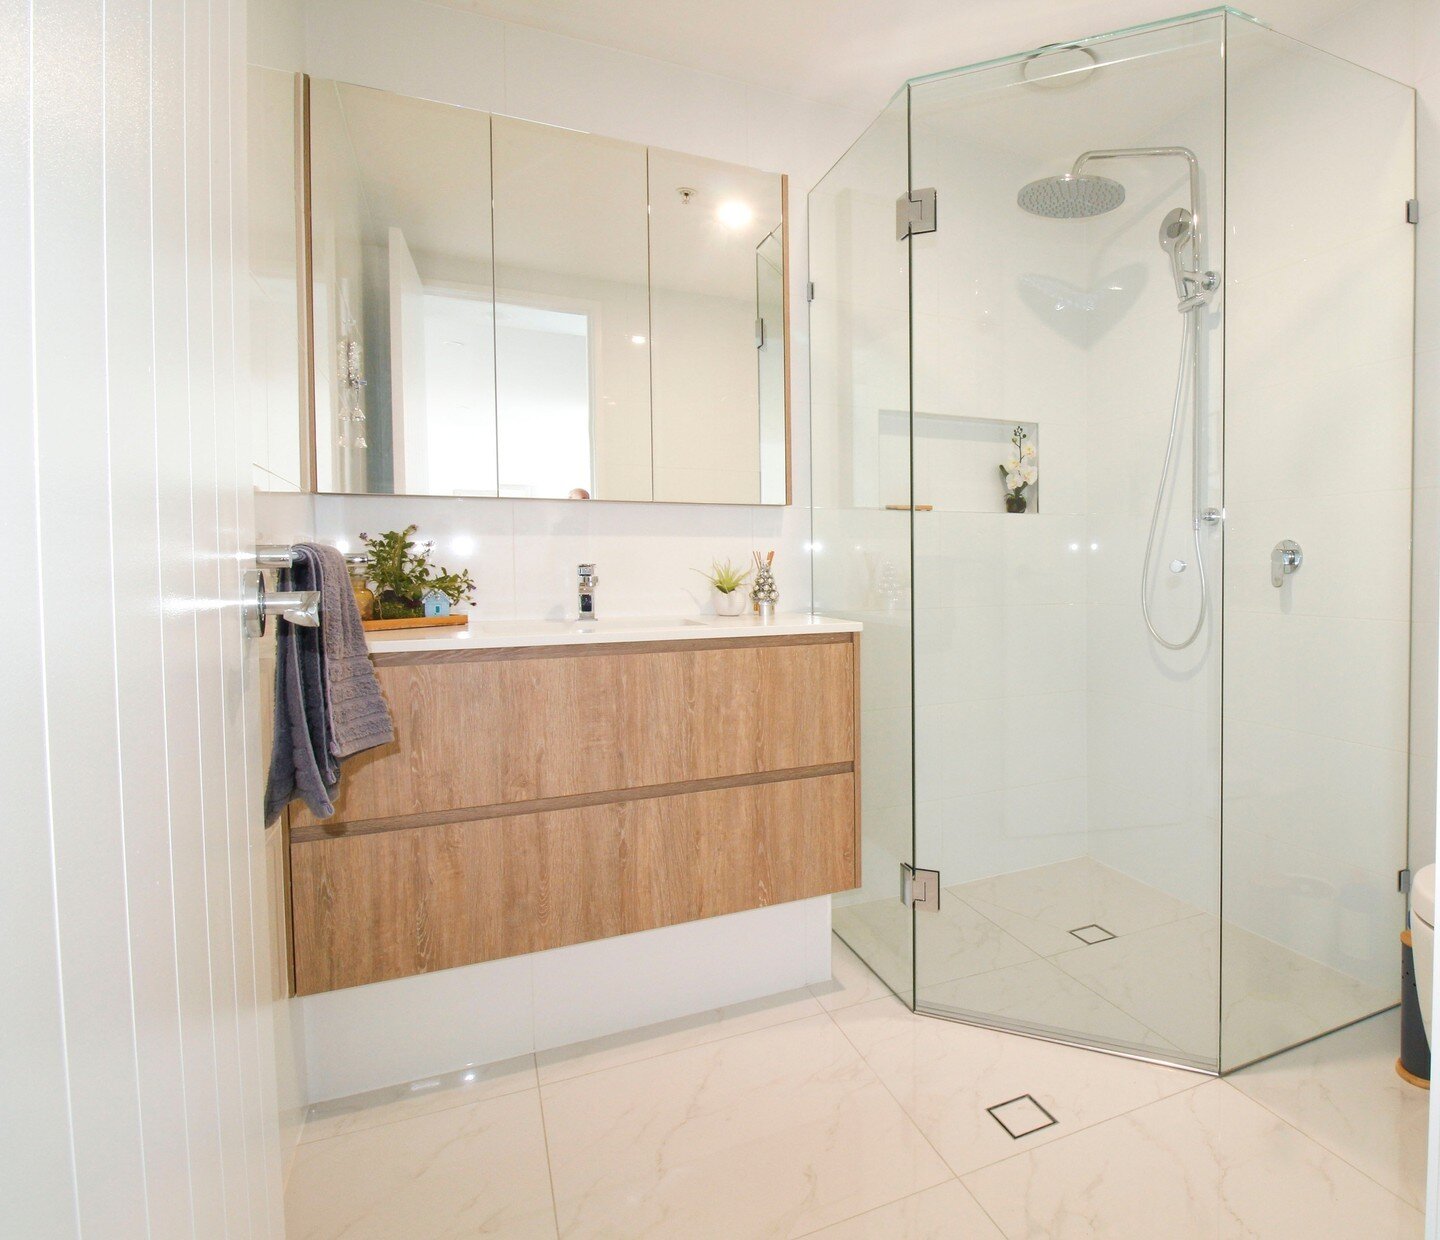 Here is the main bathroom in our Gold Coast apartment.  While we weren't able to move services, we were certainly able to fully renovate the existing room to make it feel more open and spacious.  A frameless shower screen opening the space and the sh